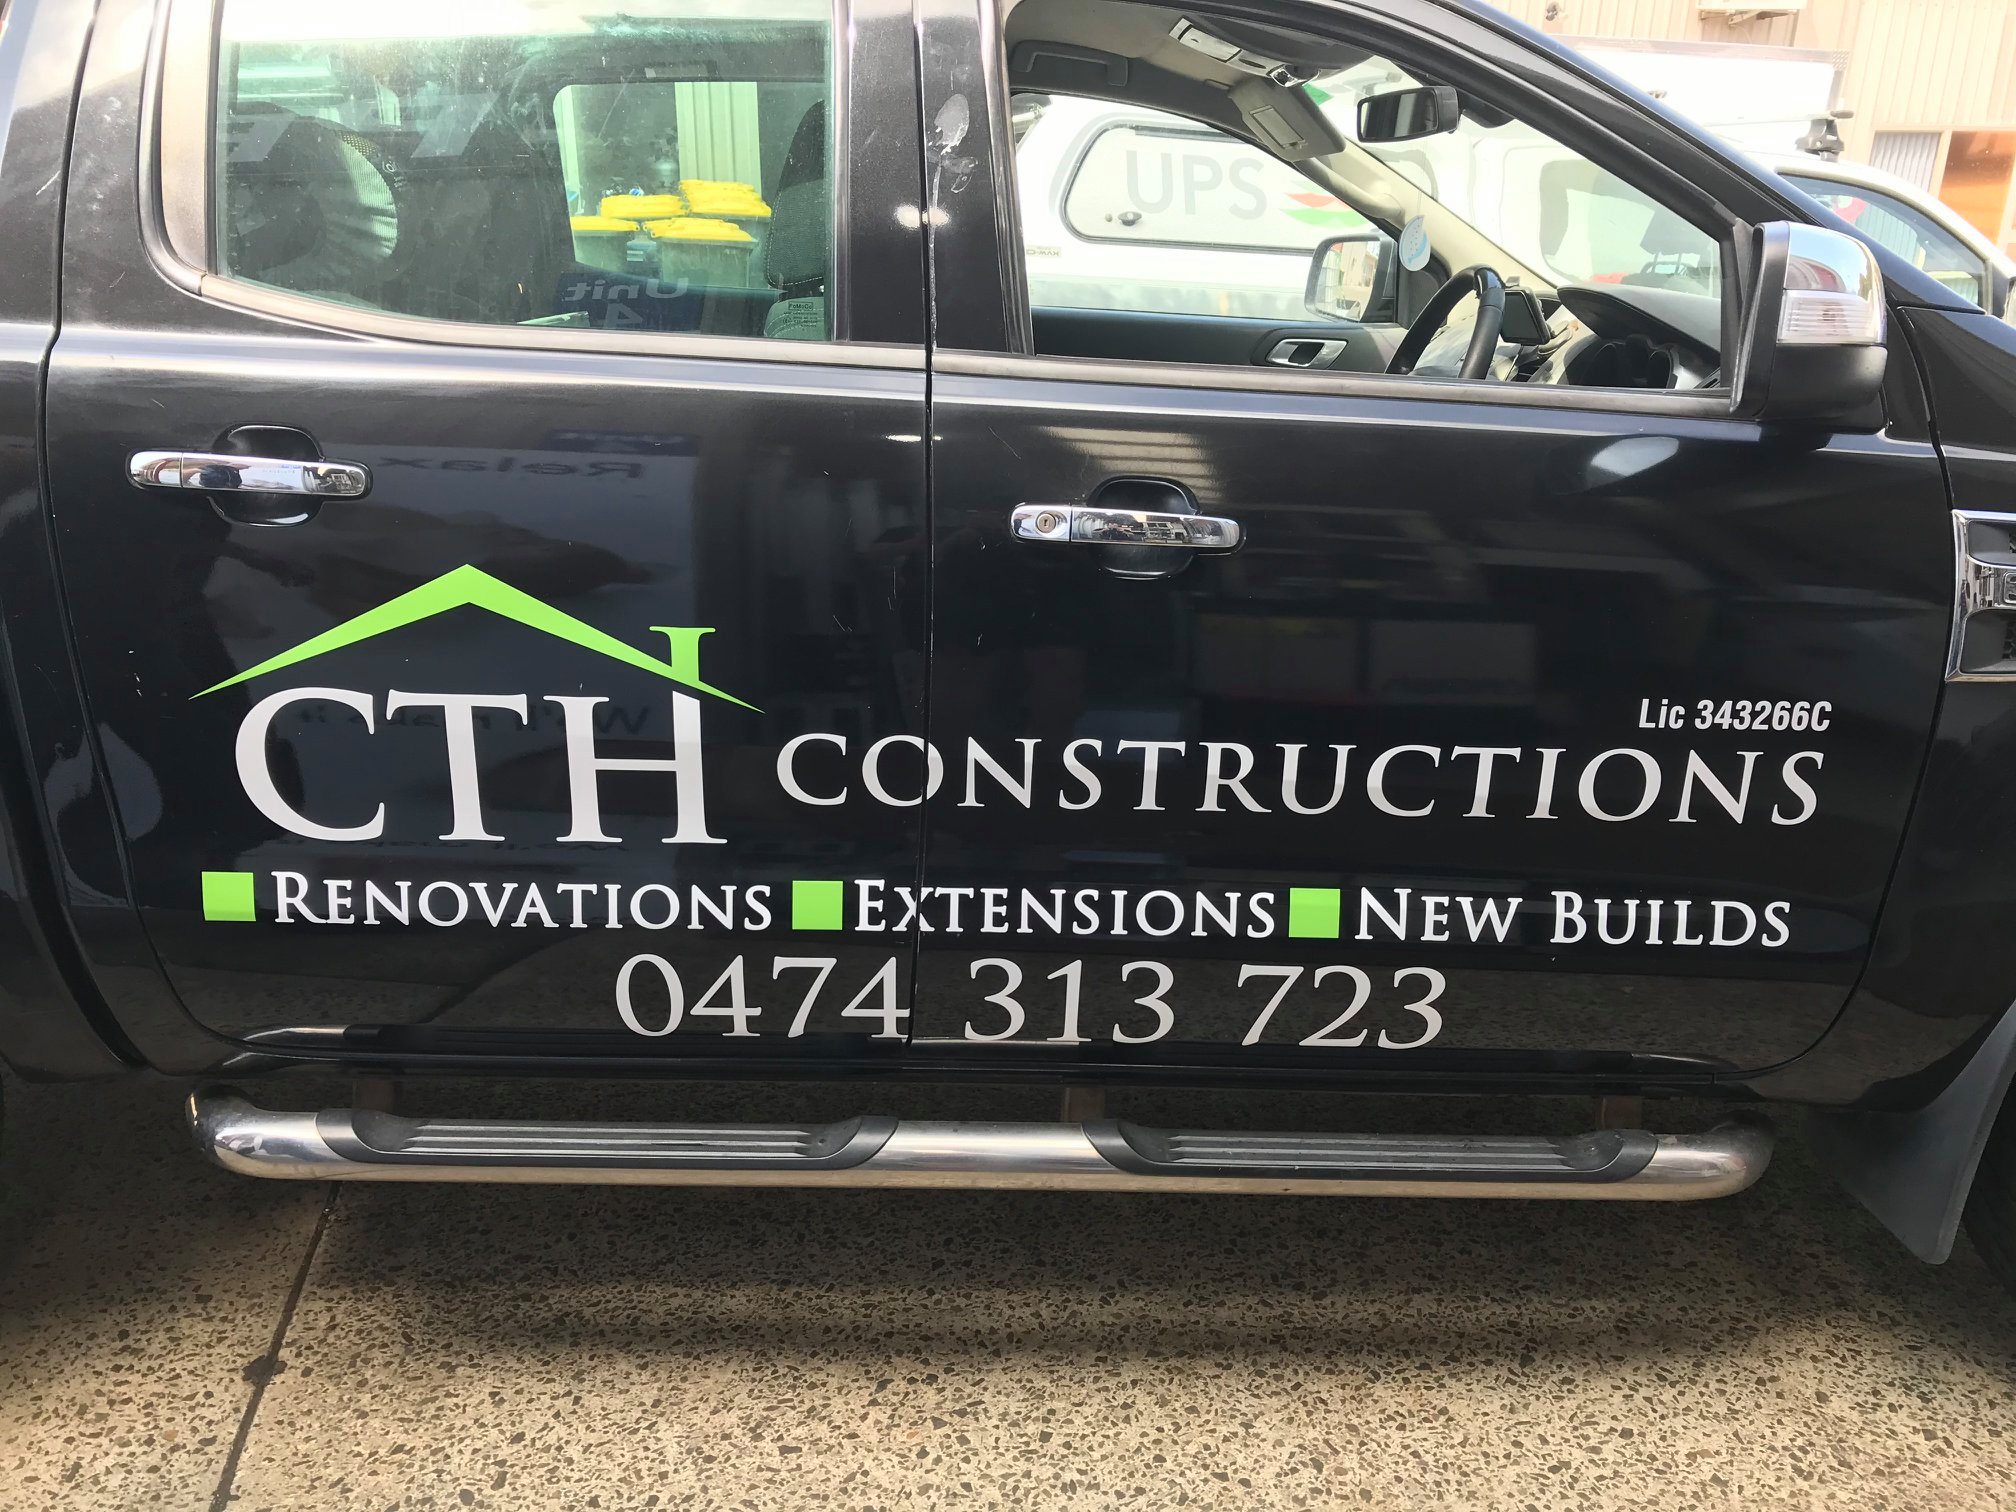 CTH Constructions - Renovations - Extensions - New Builds  | Sanctuary Point, NSW